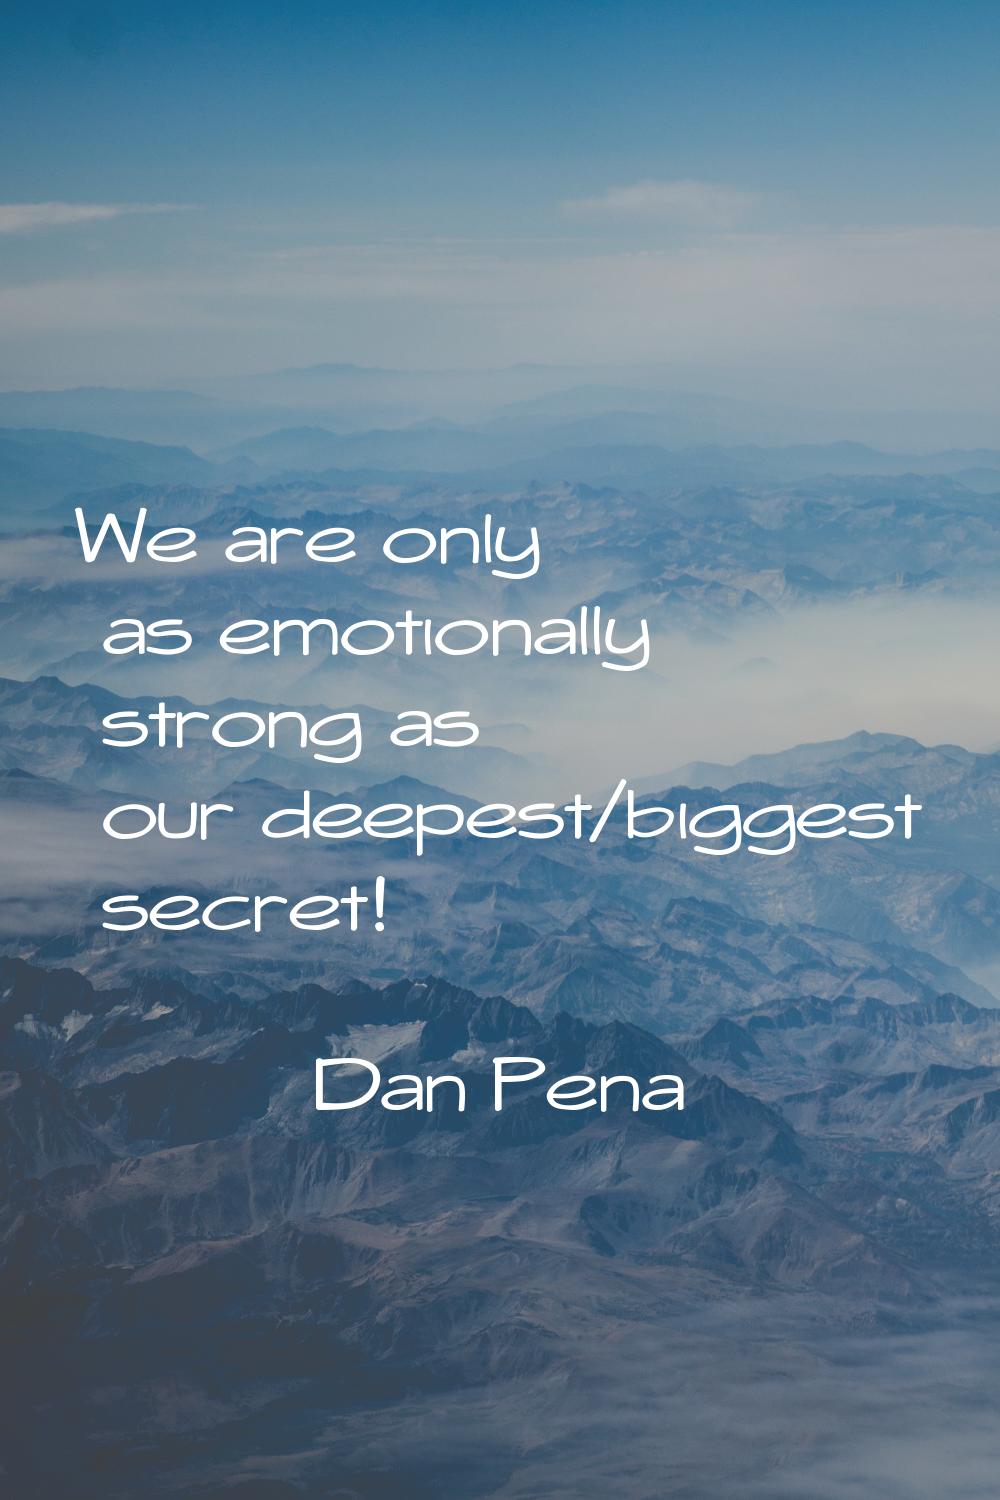 We are only as emotionally strong as our deepest/biggest secret!